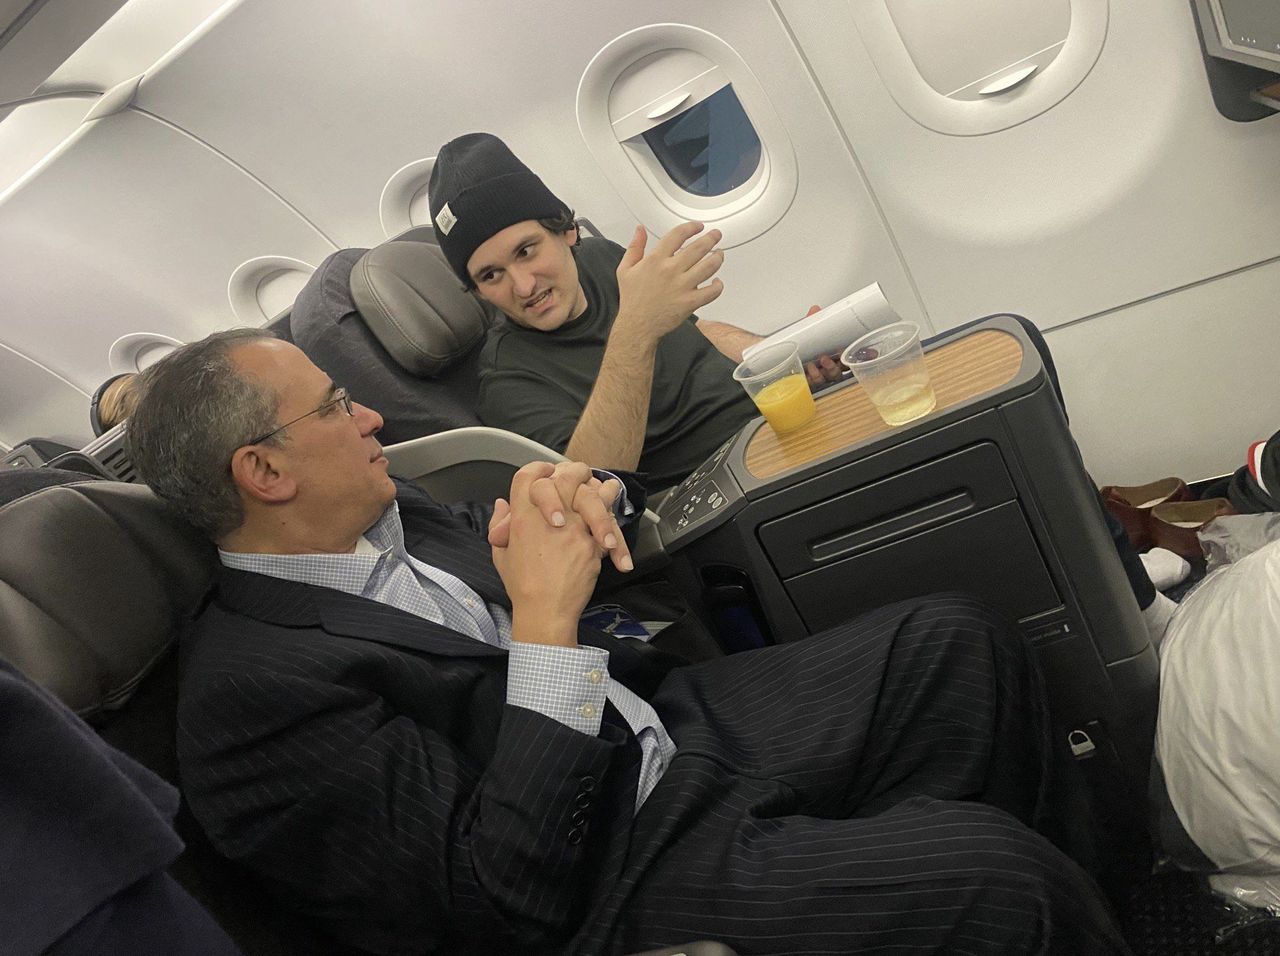 'Crime' DOES pay! FTX 'fraudster' Sam Bankman-Fried relaxes at JFK lounge and on business class AA seat 'as he flies home to California after being freed on $250m bail over $1.8bn crypto scam'